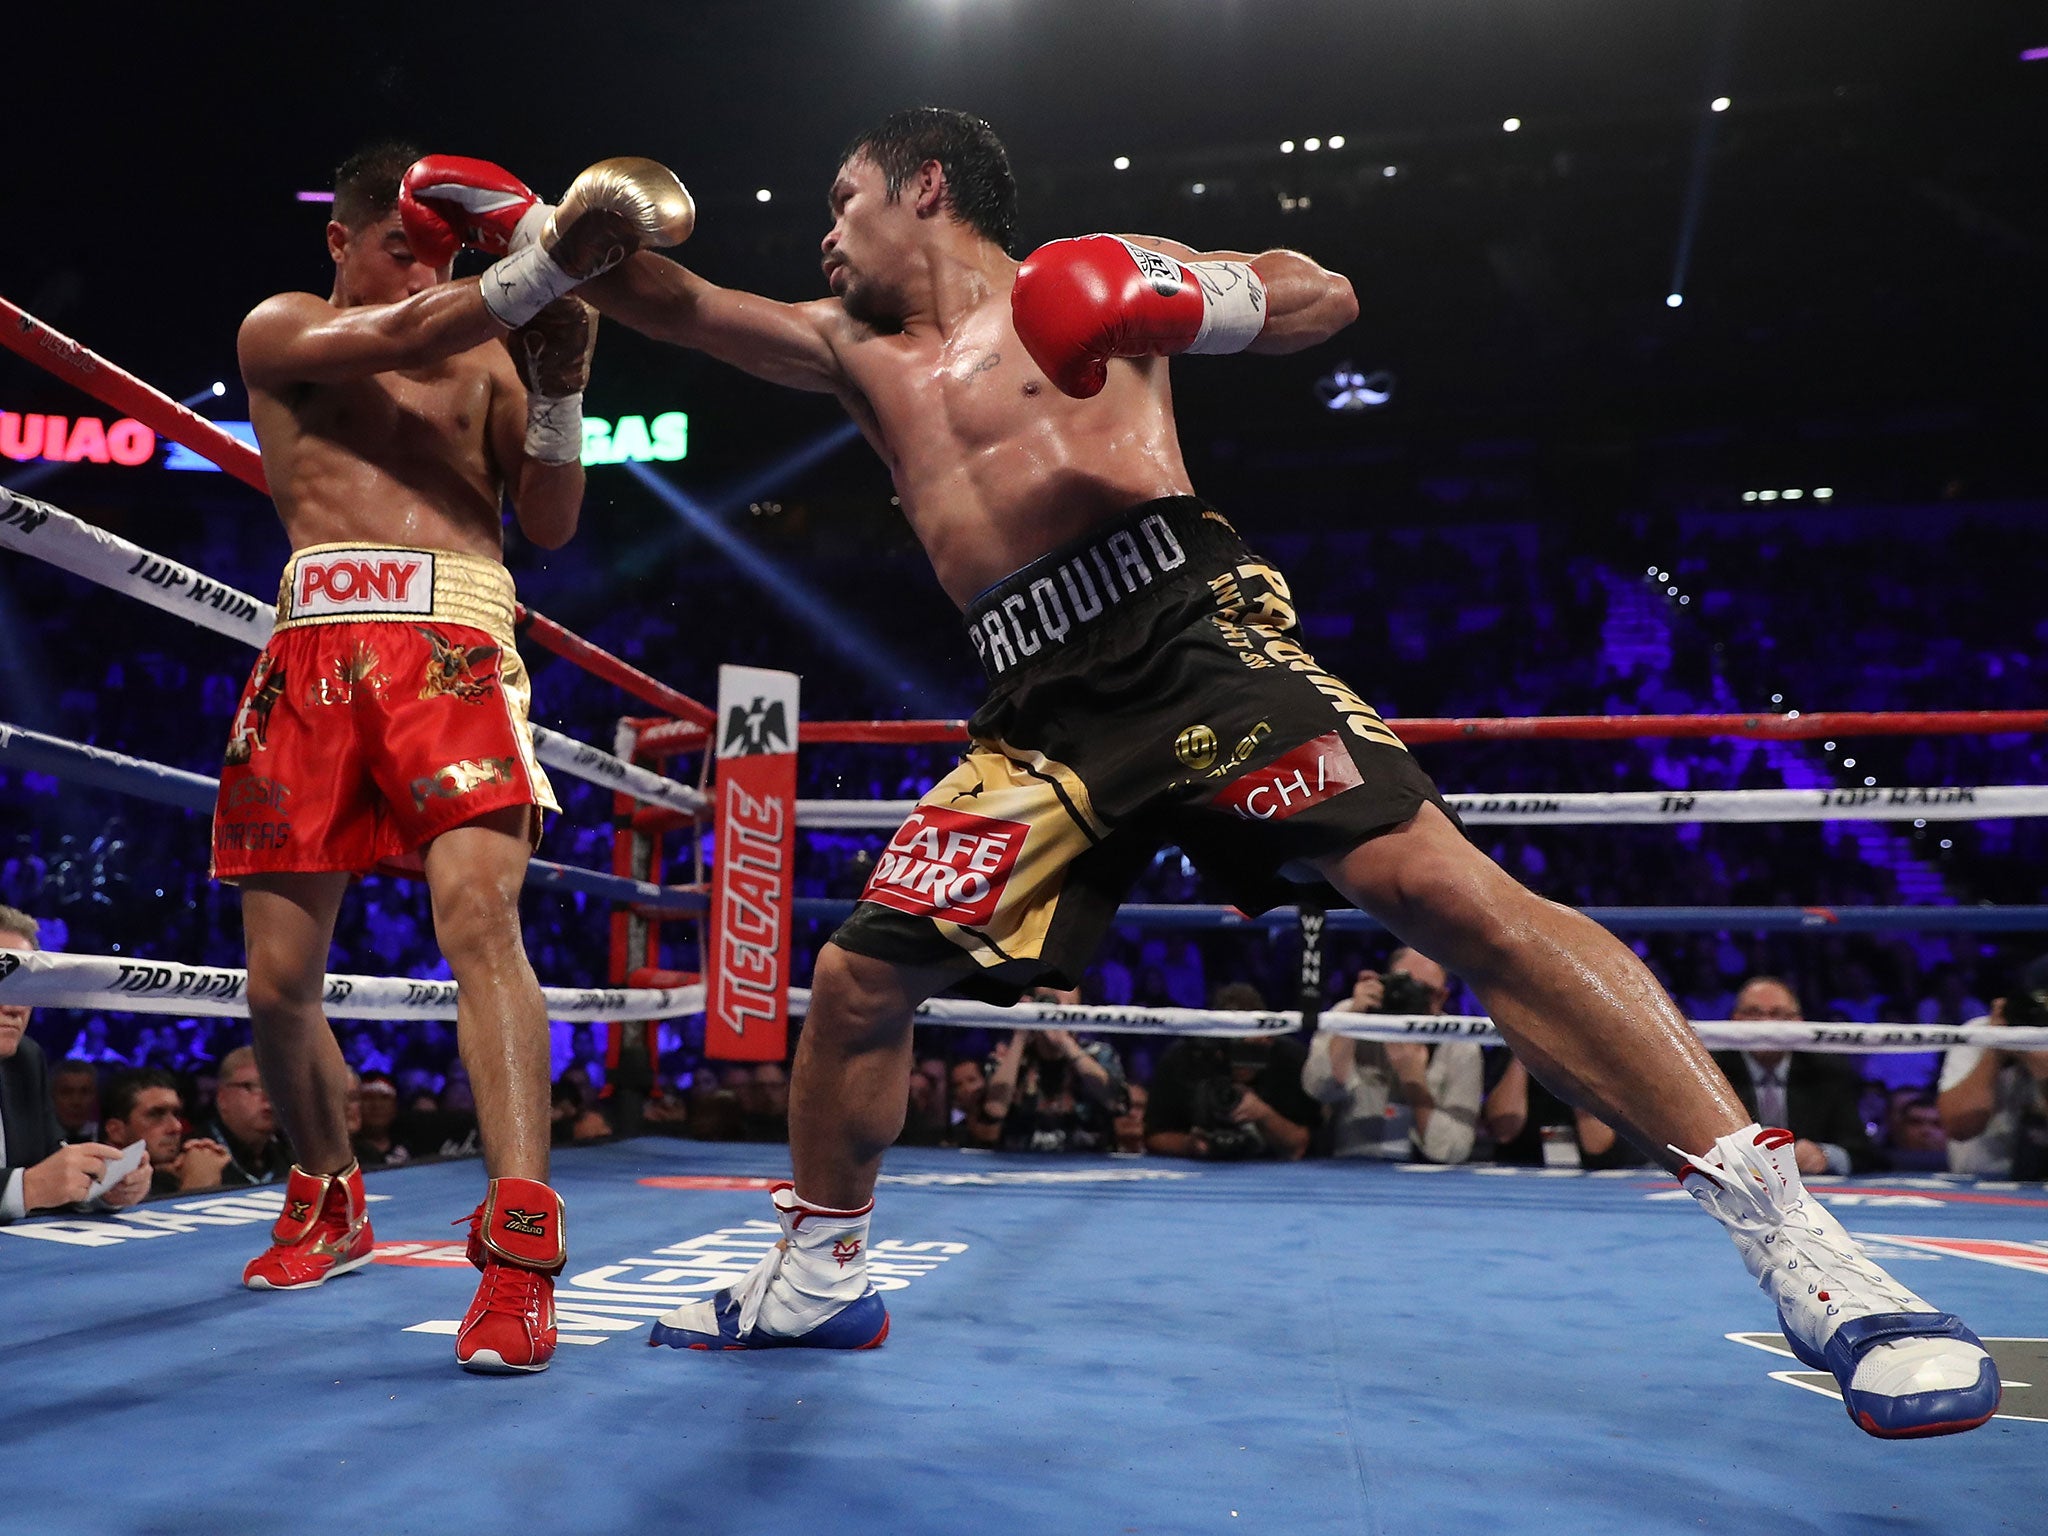 Pacquiao lands a blow against his American opponent